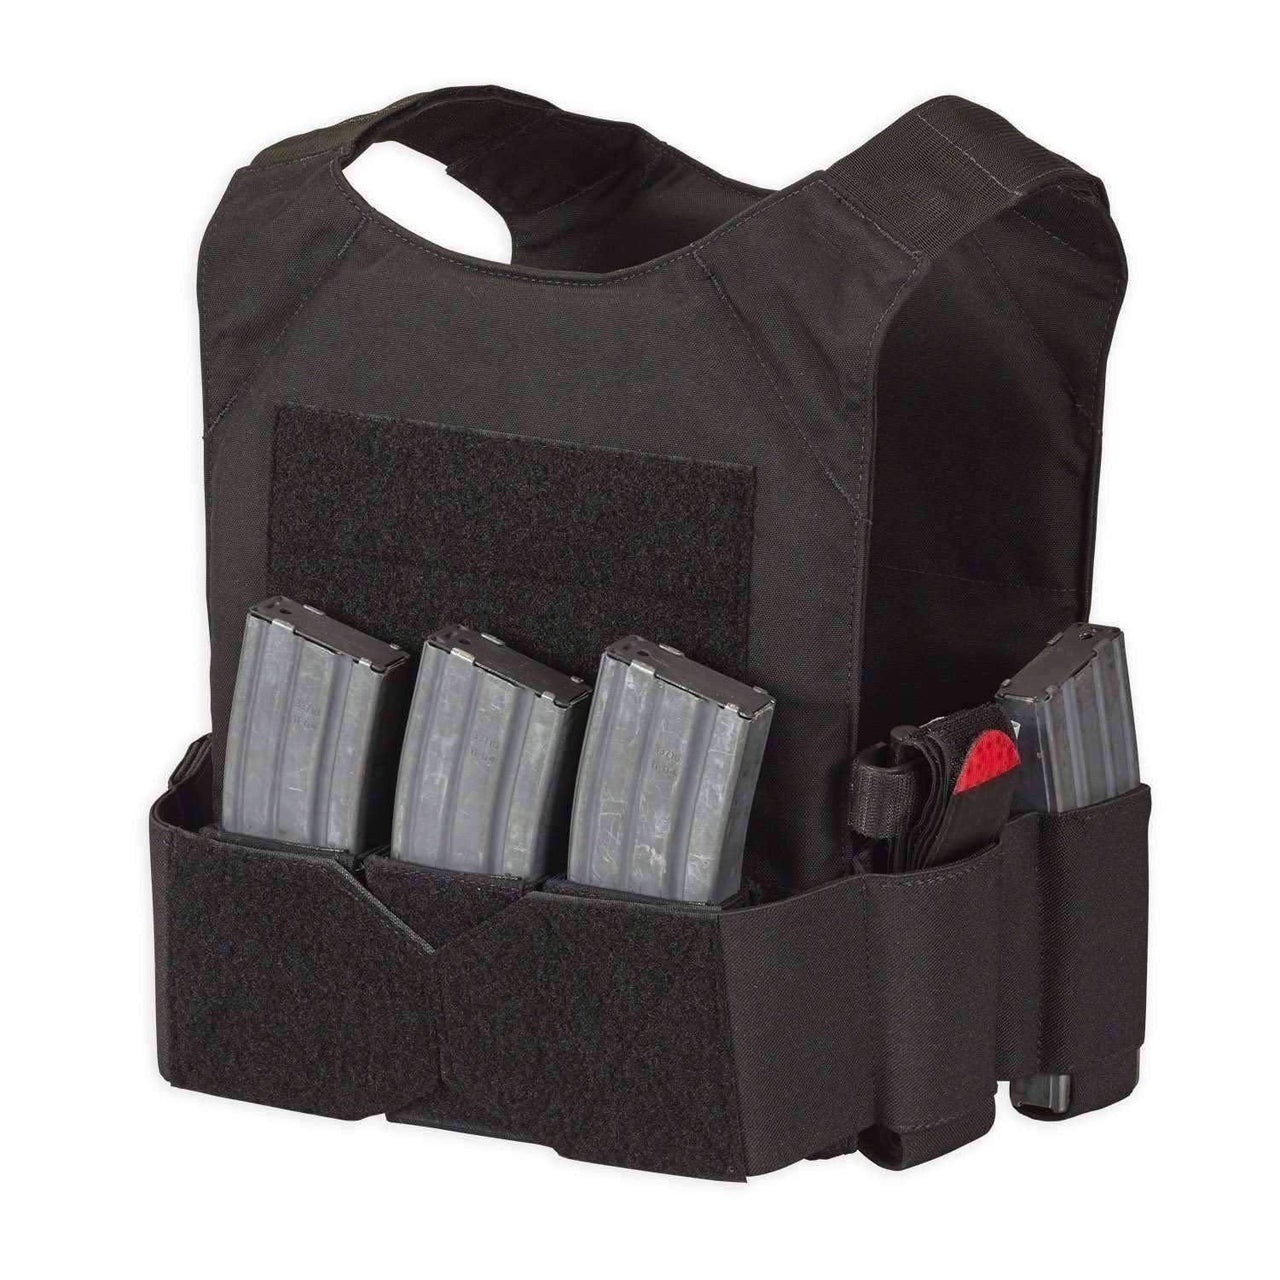 Chase Tactical Low Visibility Plate Carrier - M1 - Vendor